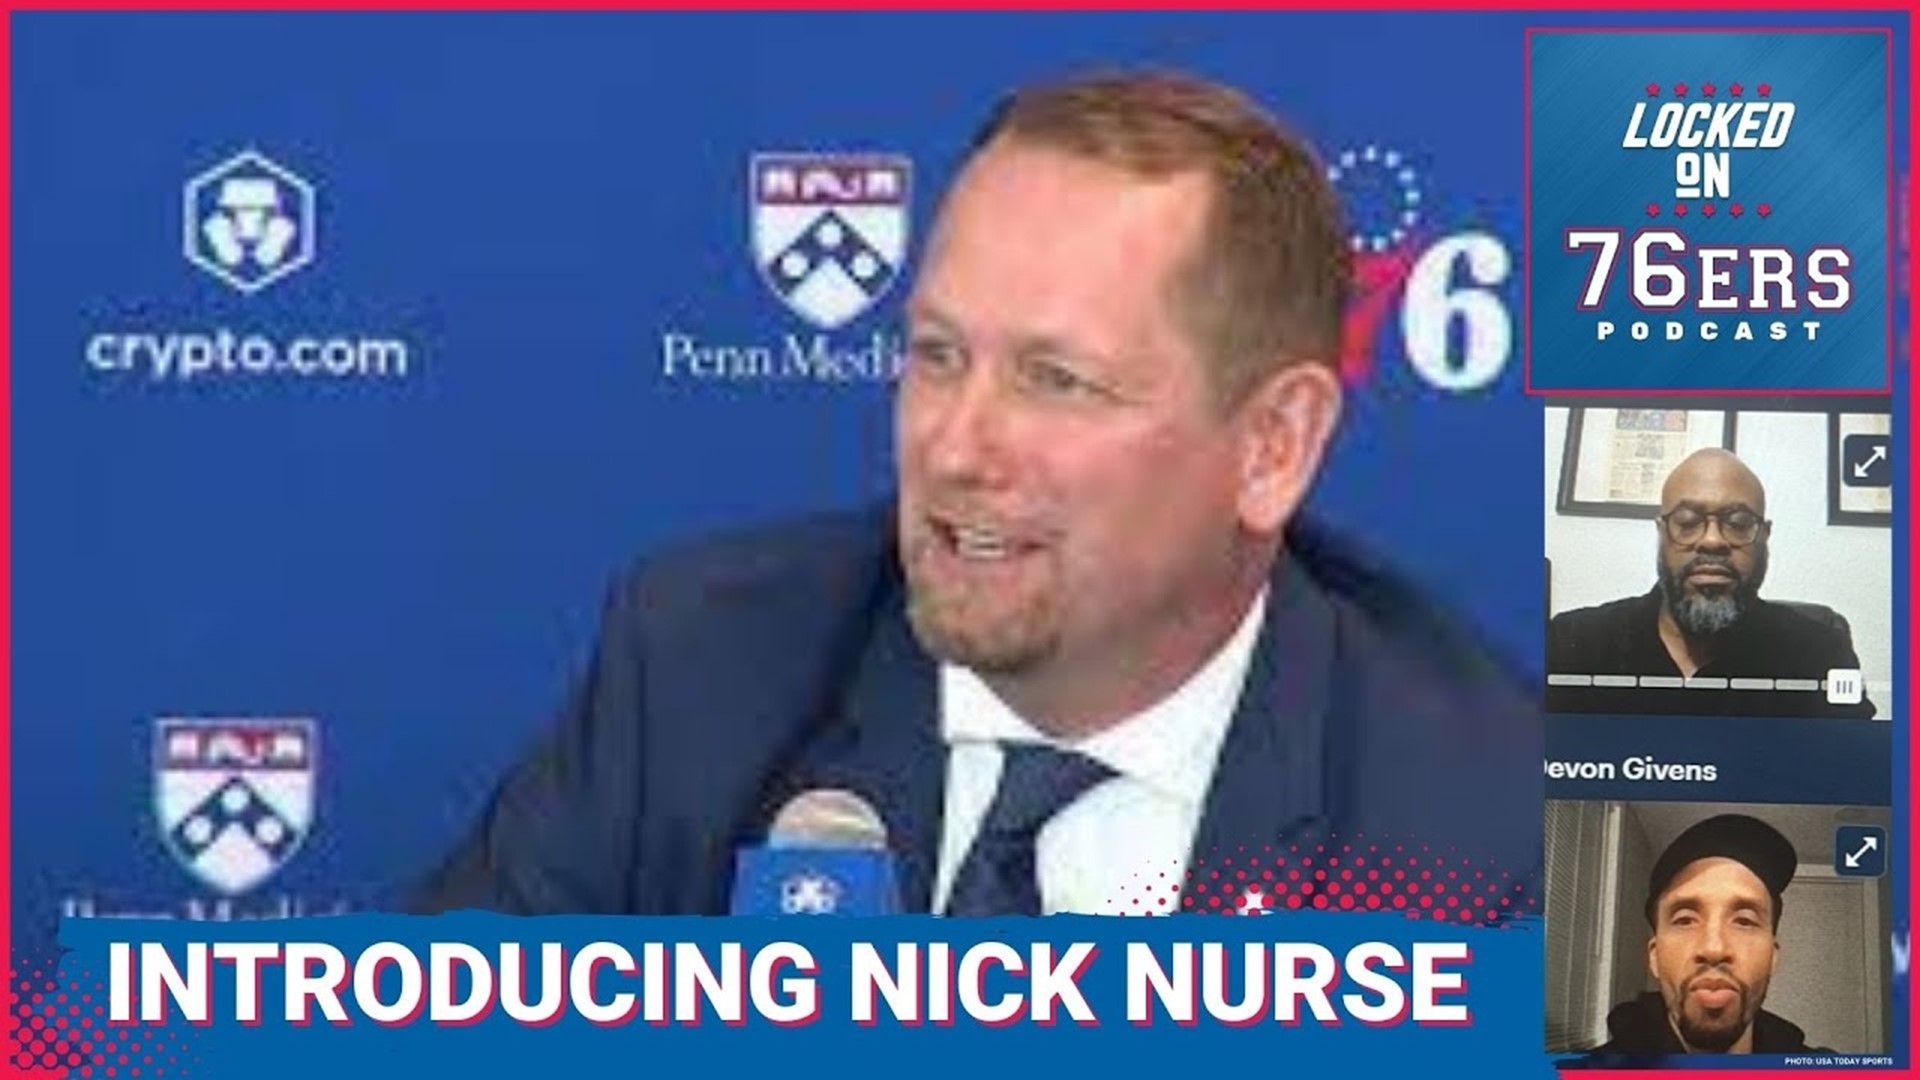 The 76ers introduced Nick Nurse as their head coach on Thursday. Devon Givens and Keith Pompey  talk about what stood out in the press conference.